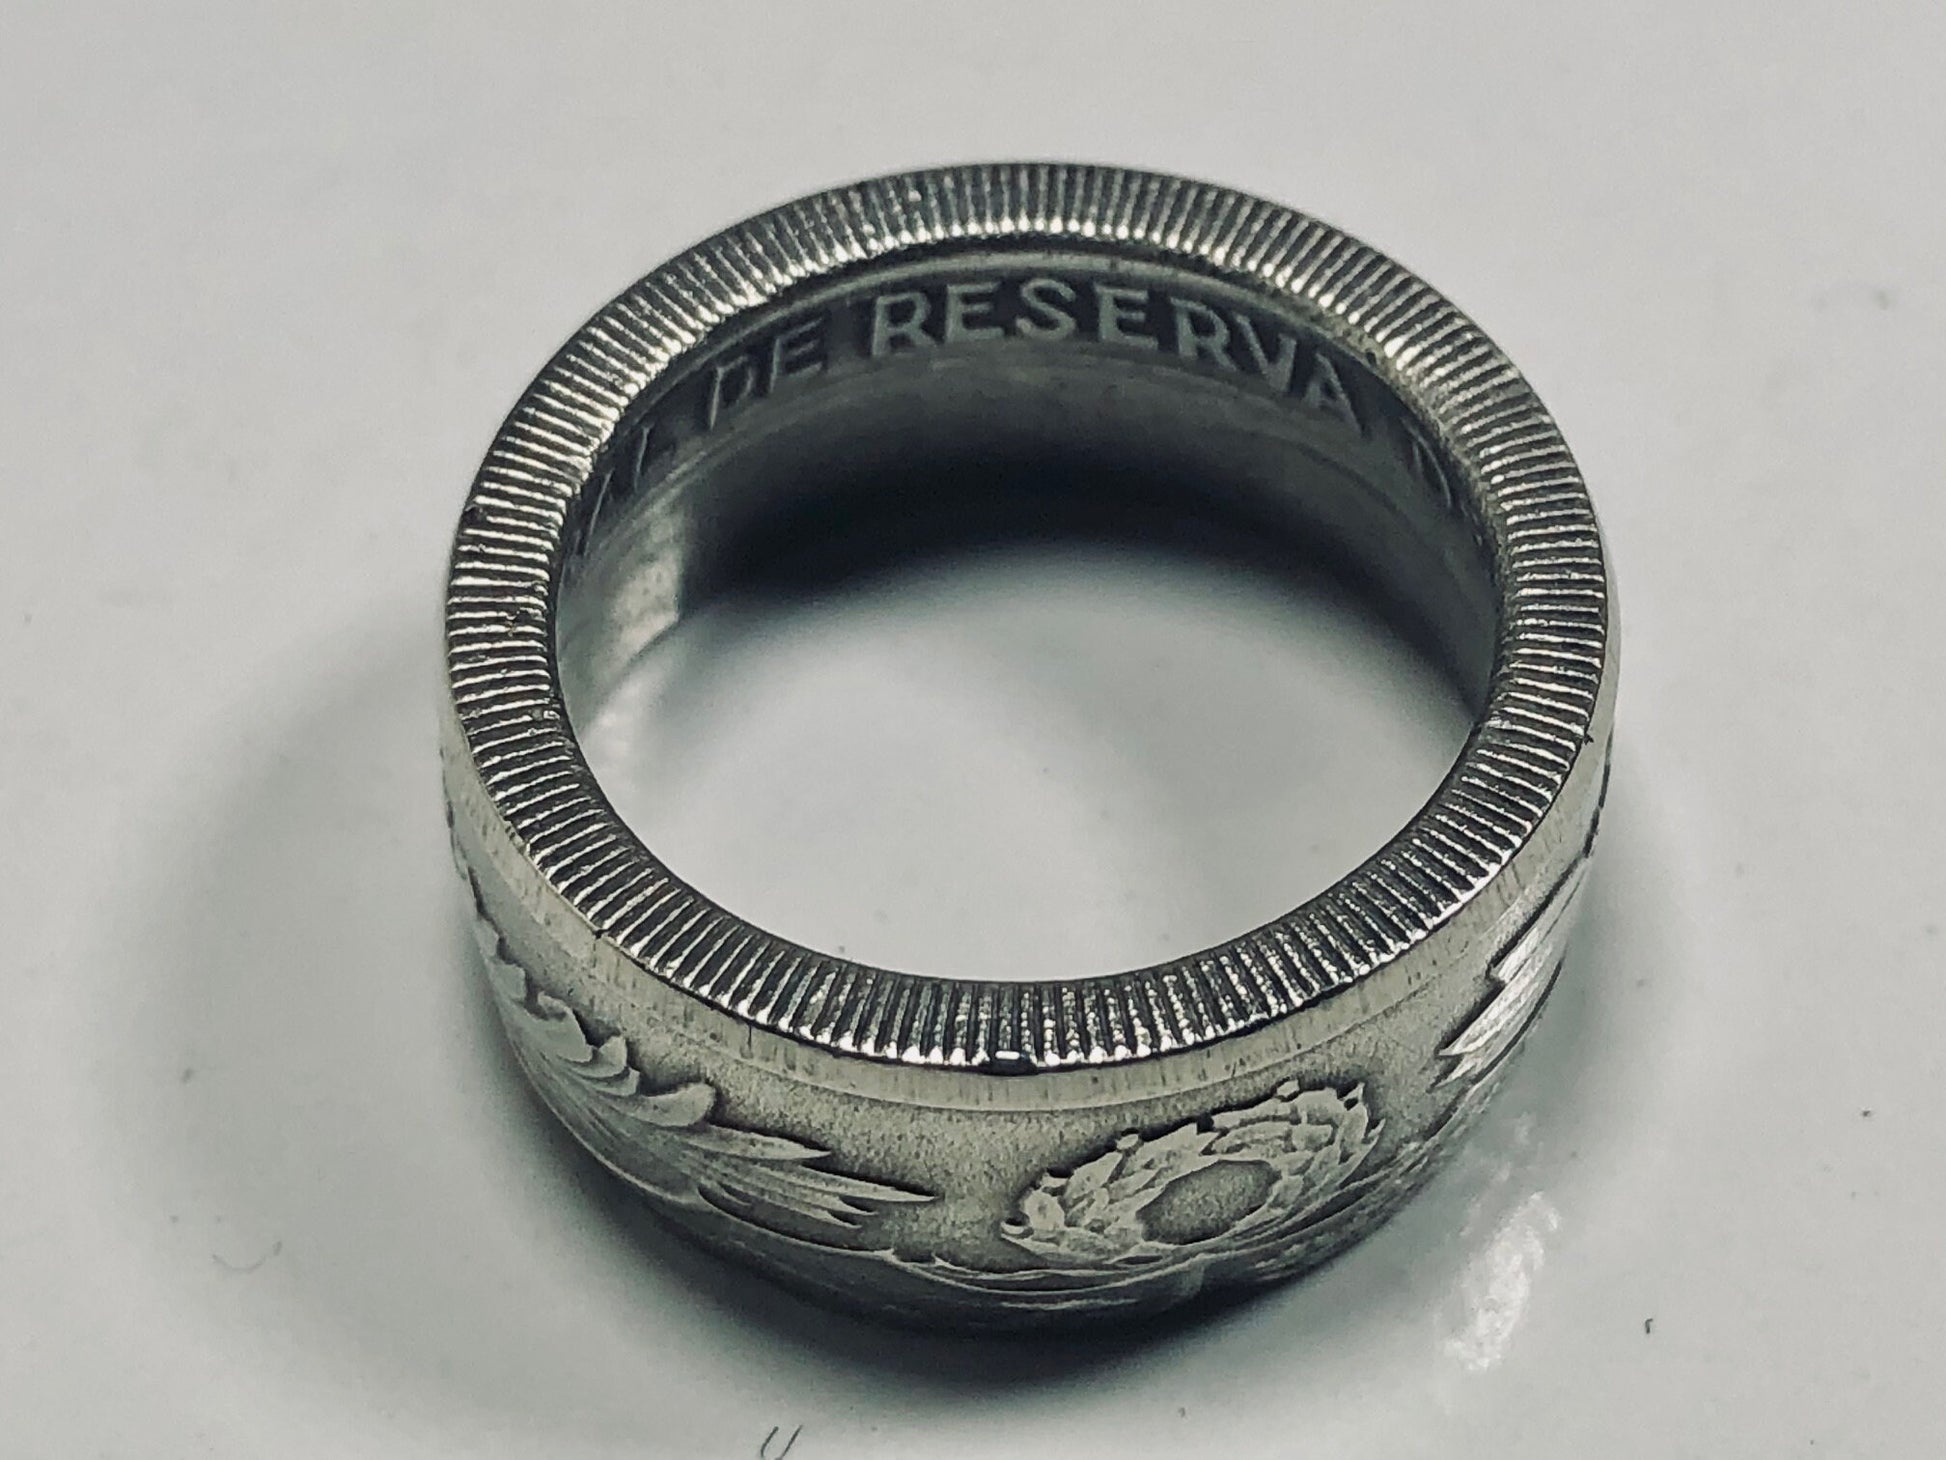 Peru Coin Ring Peruvian Handmade Personal Custom Charm Ring Gift For Friend Coin Ring Gift For Him Her World Coin Collector